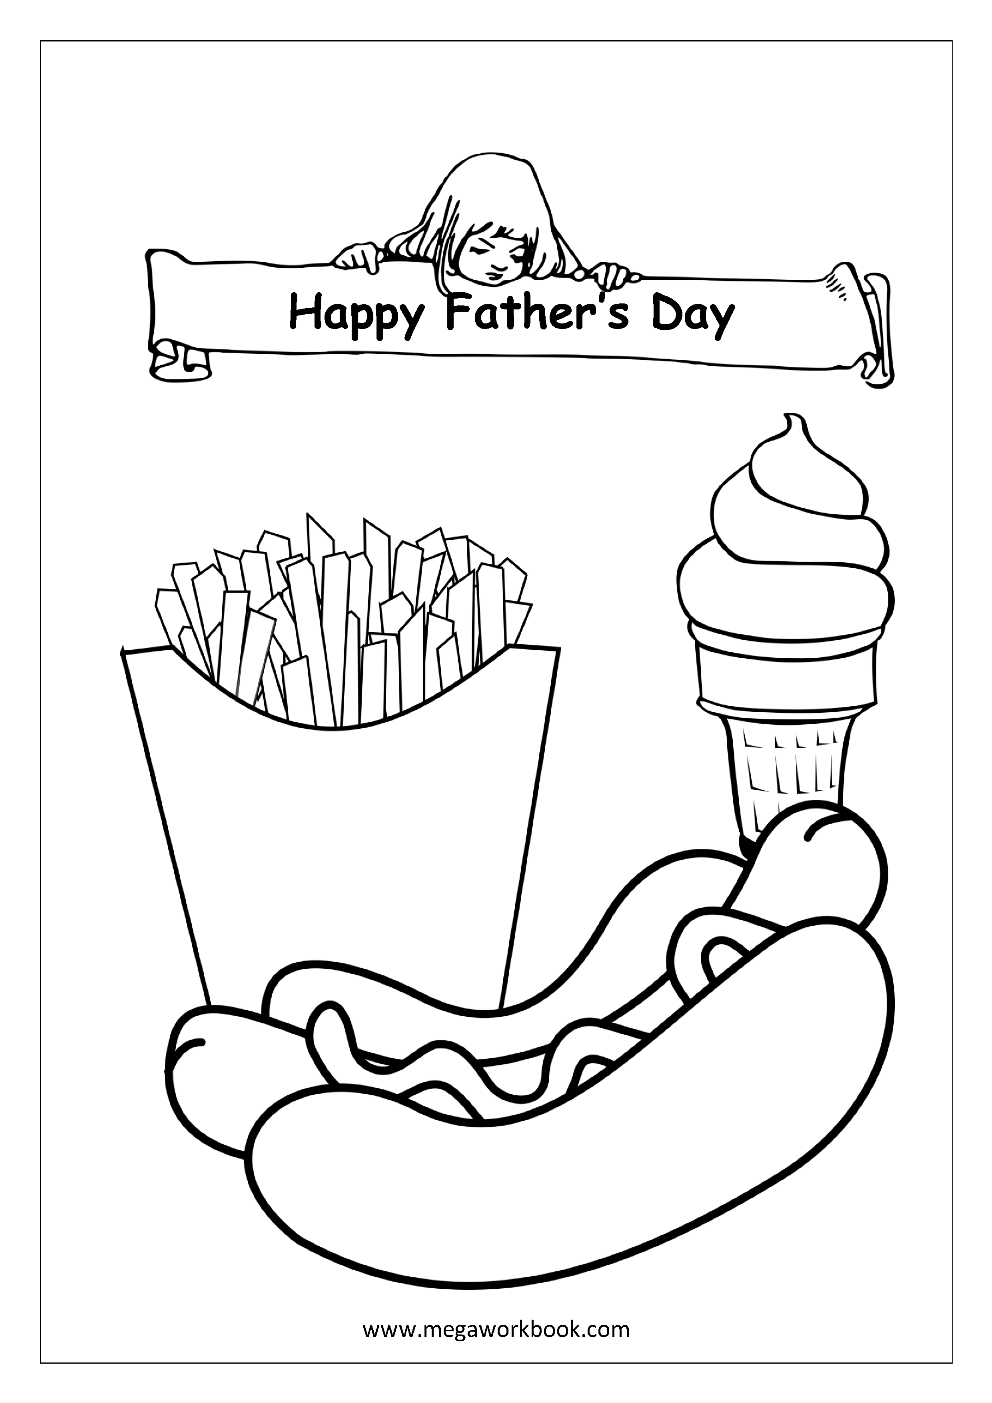 free printable father s day fathers day coloring pages for kids kindergarten and preschool megaworkbook